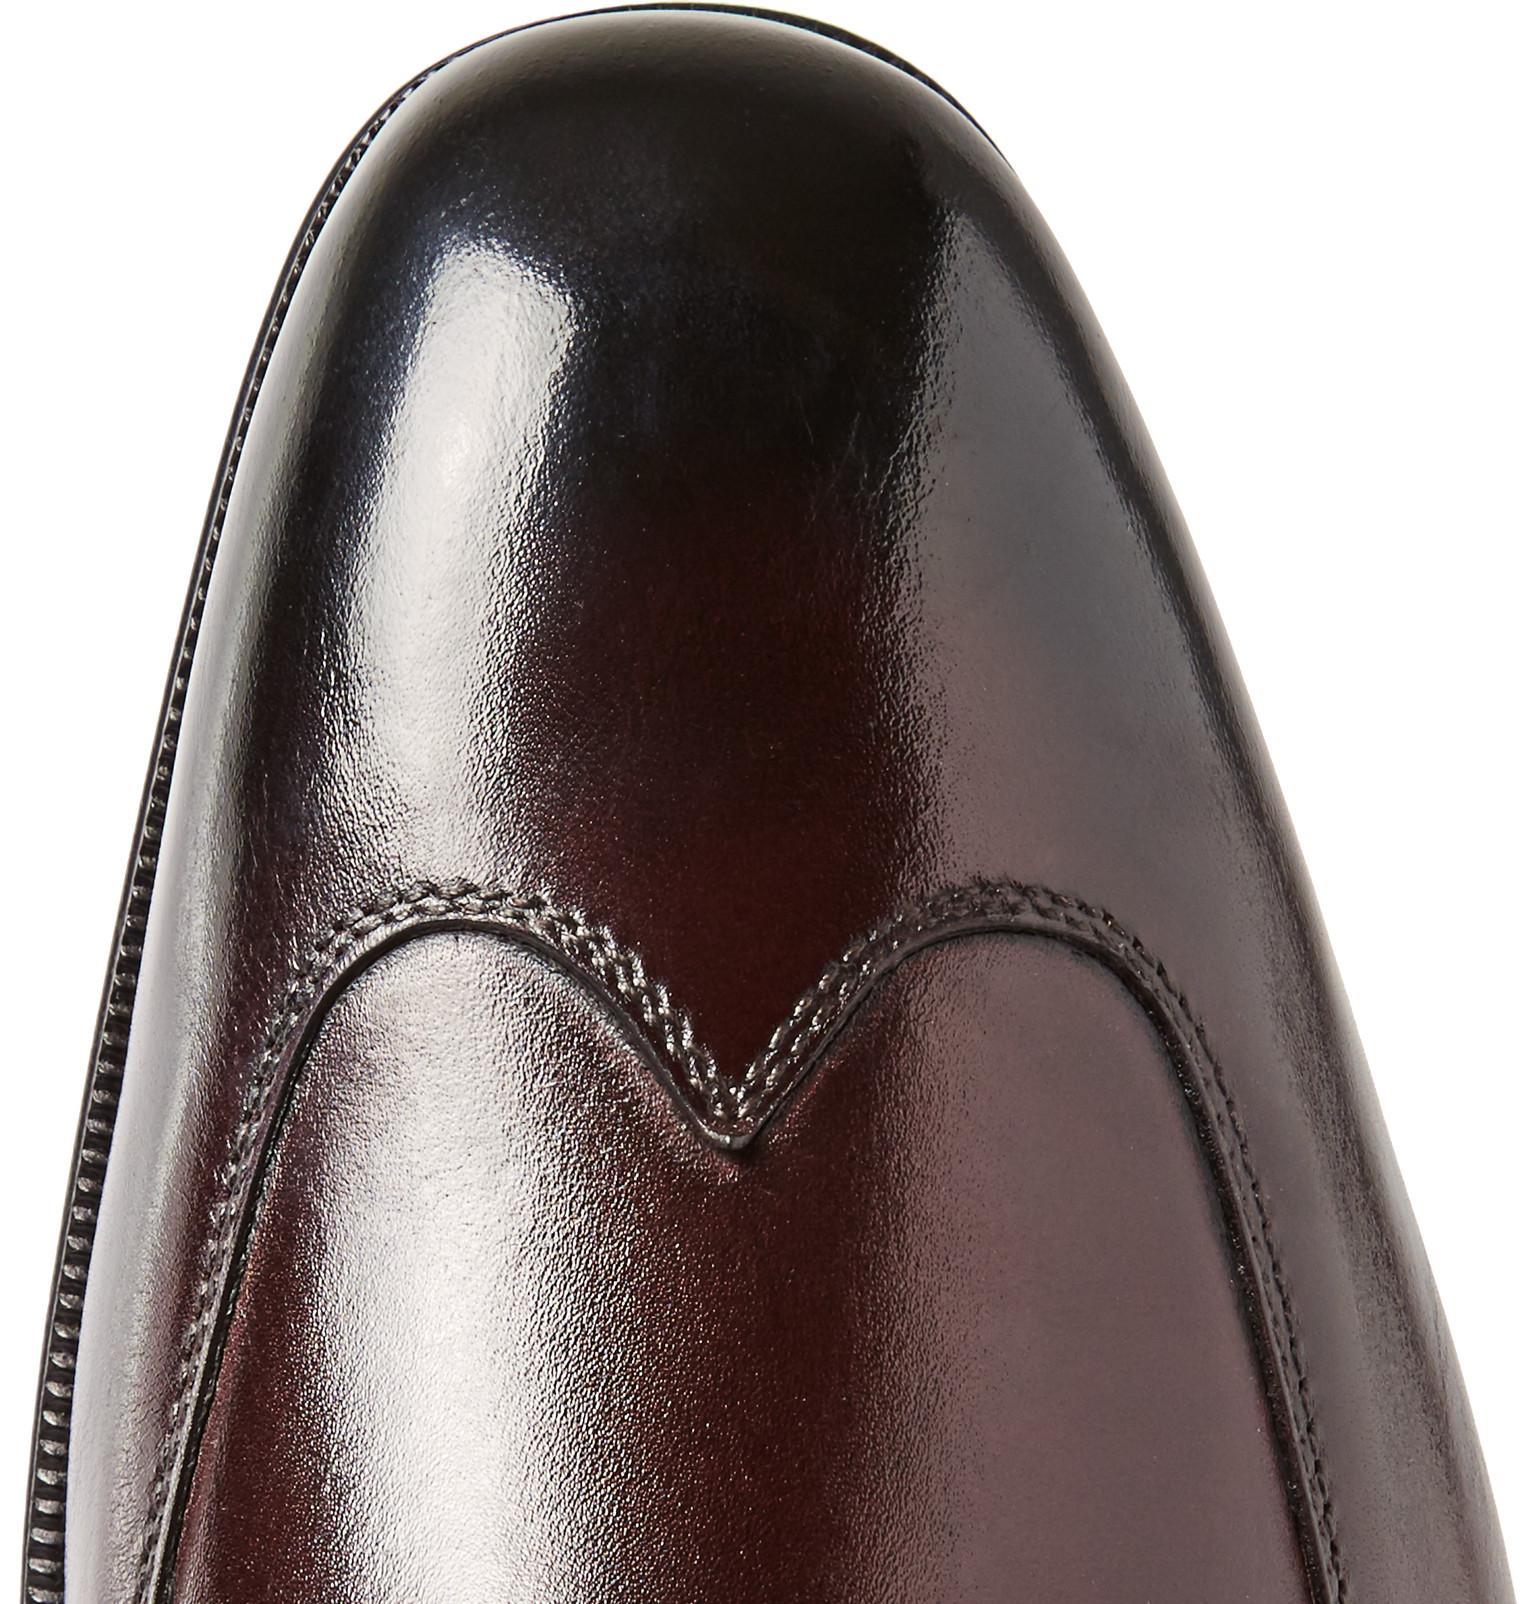 tom ford wingtips